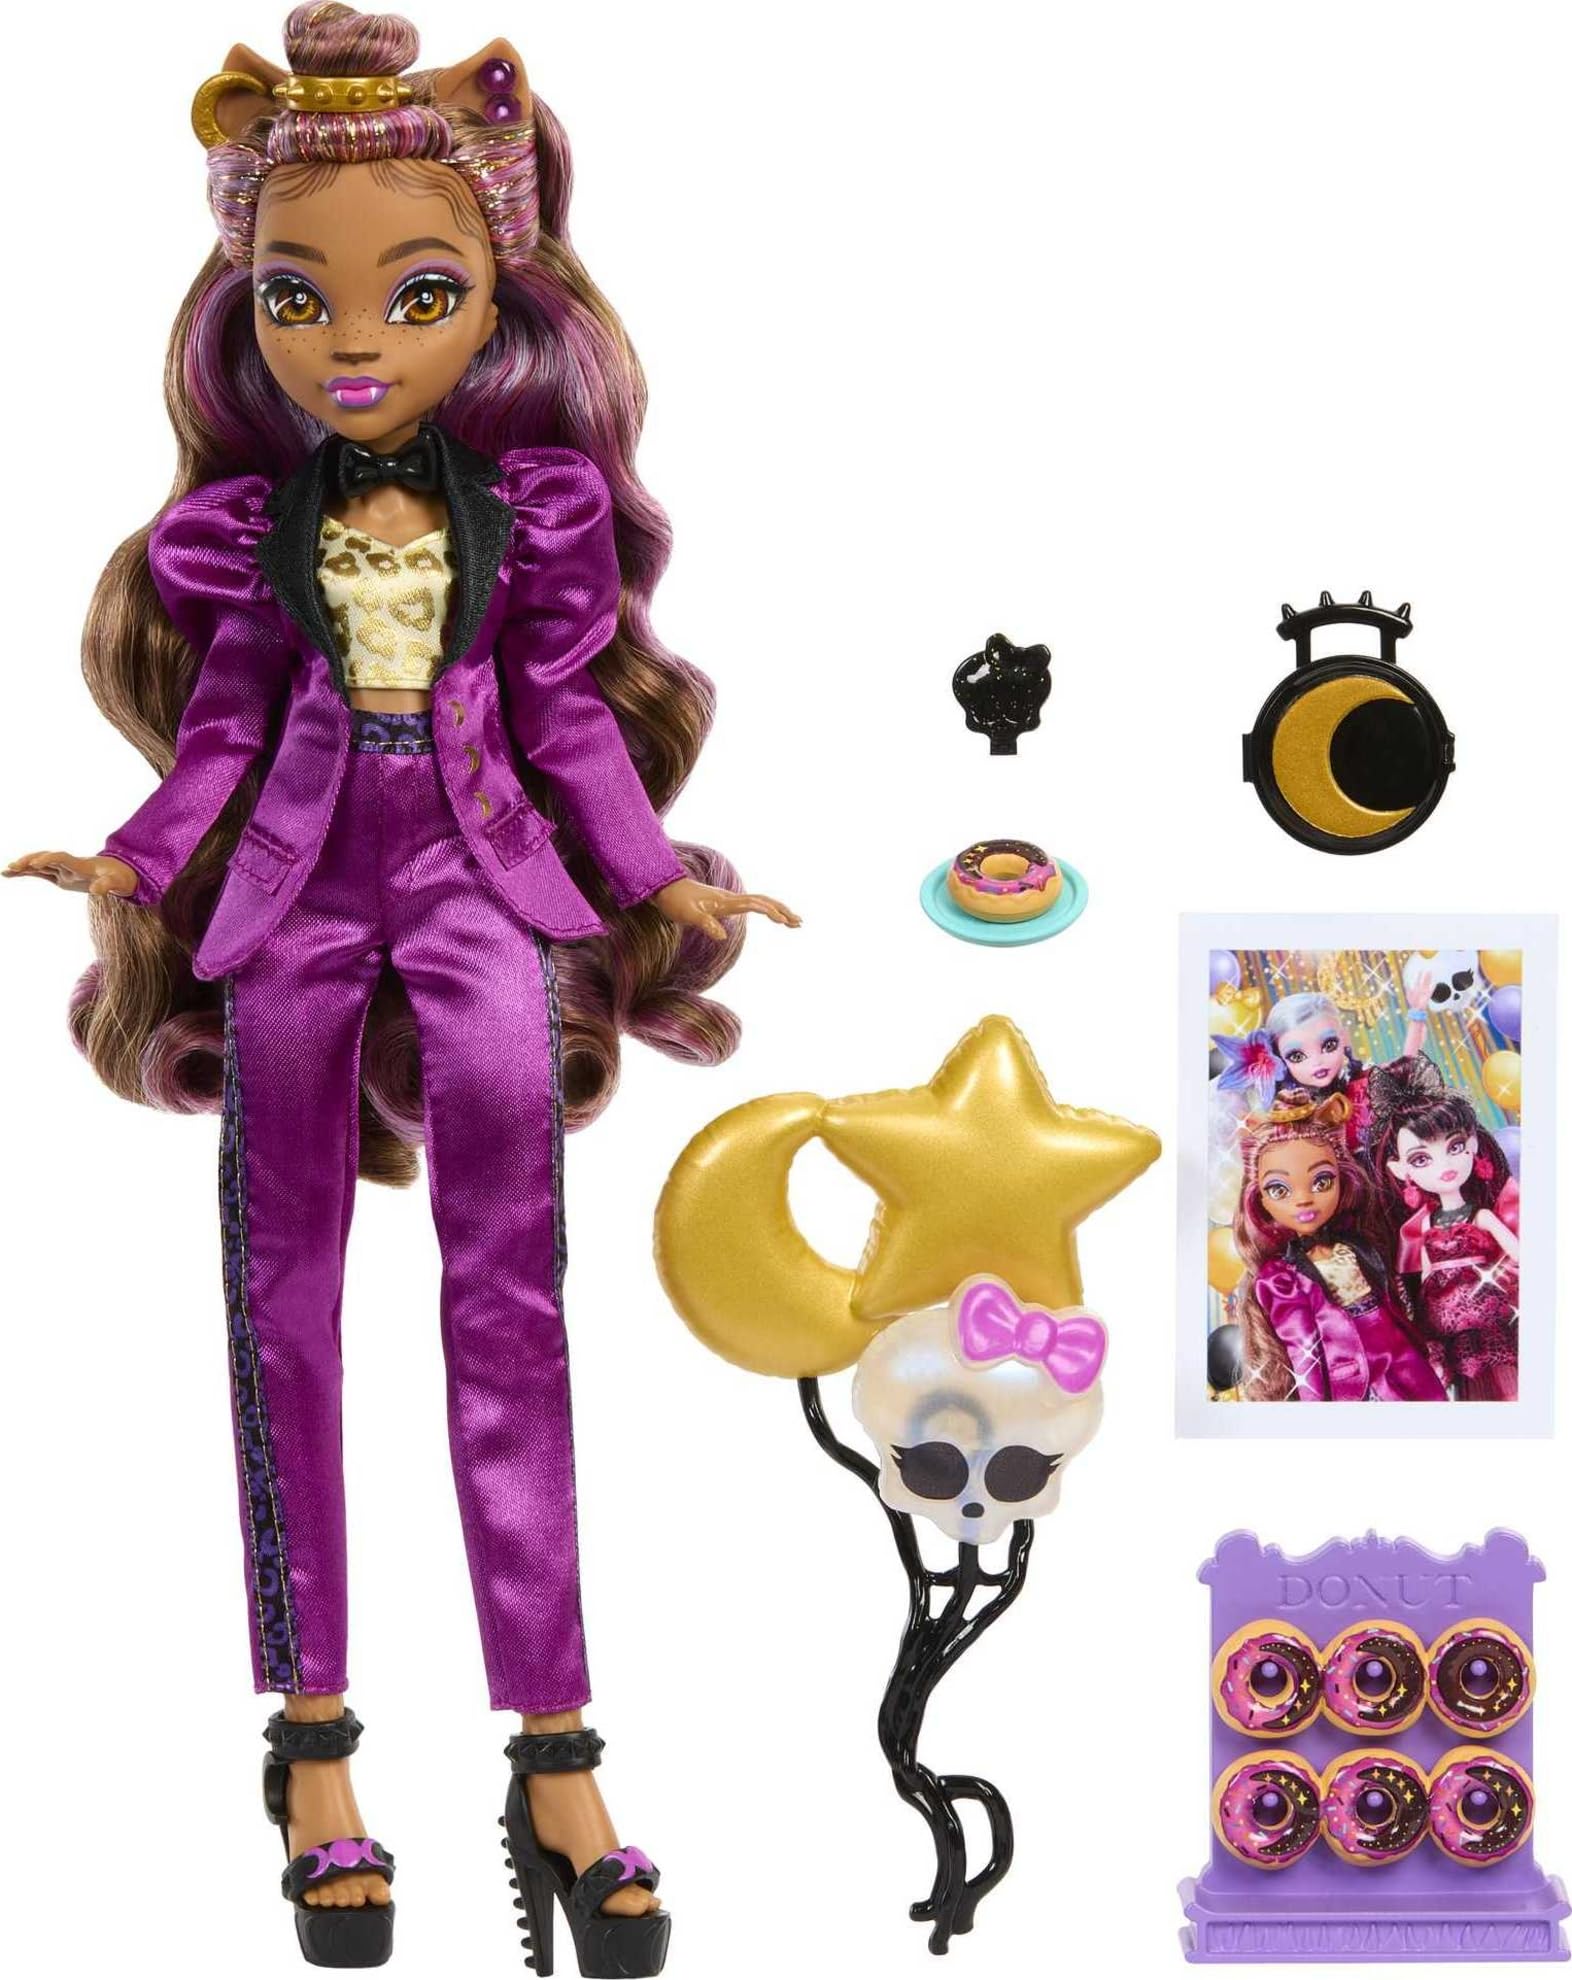 Monster High Clawdeen Wolf Doll in Monster Ball Party Fashion with Themed Accessories Like Balloons